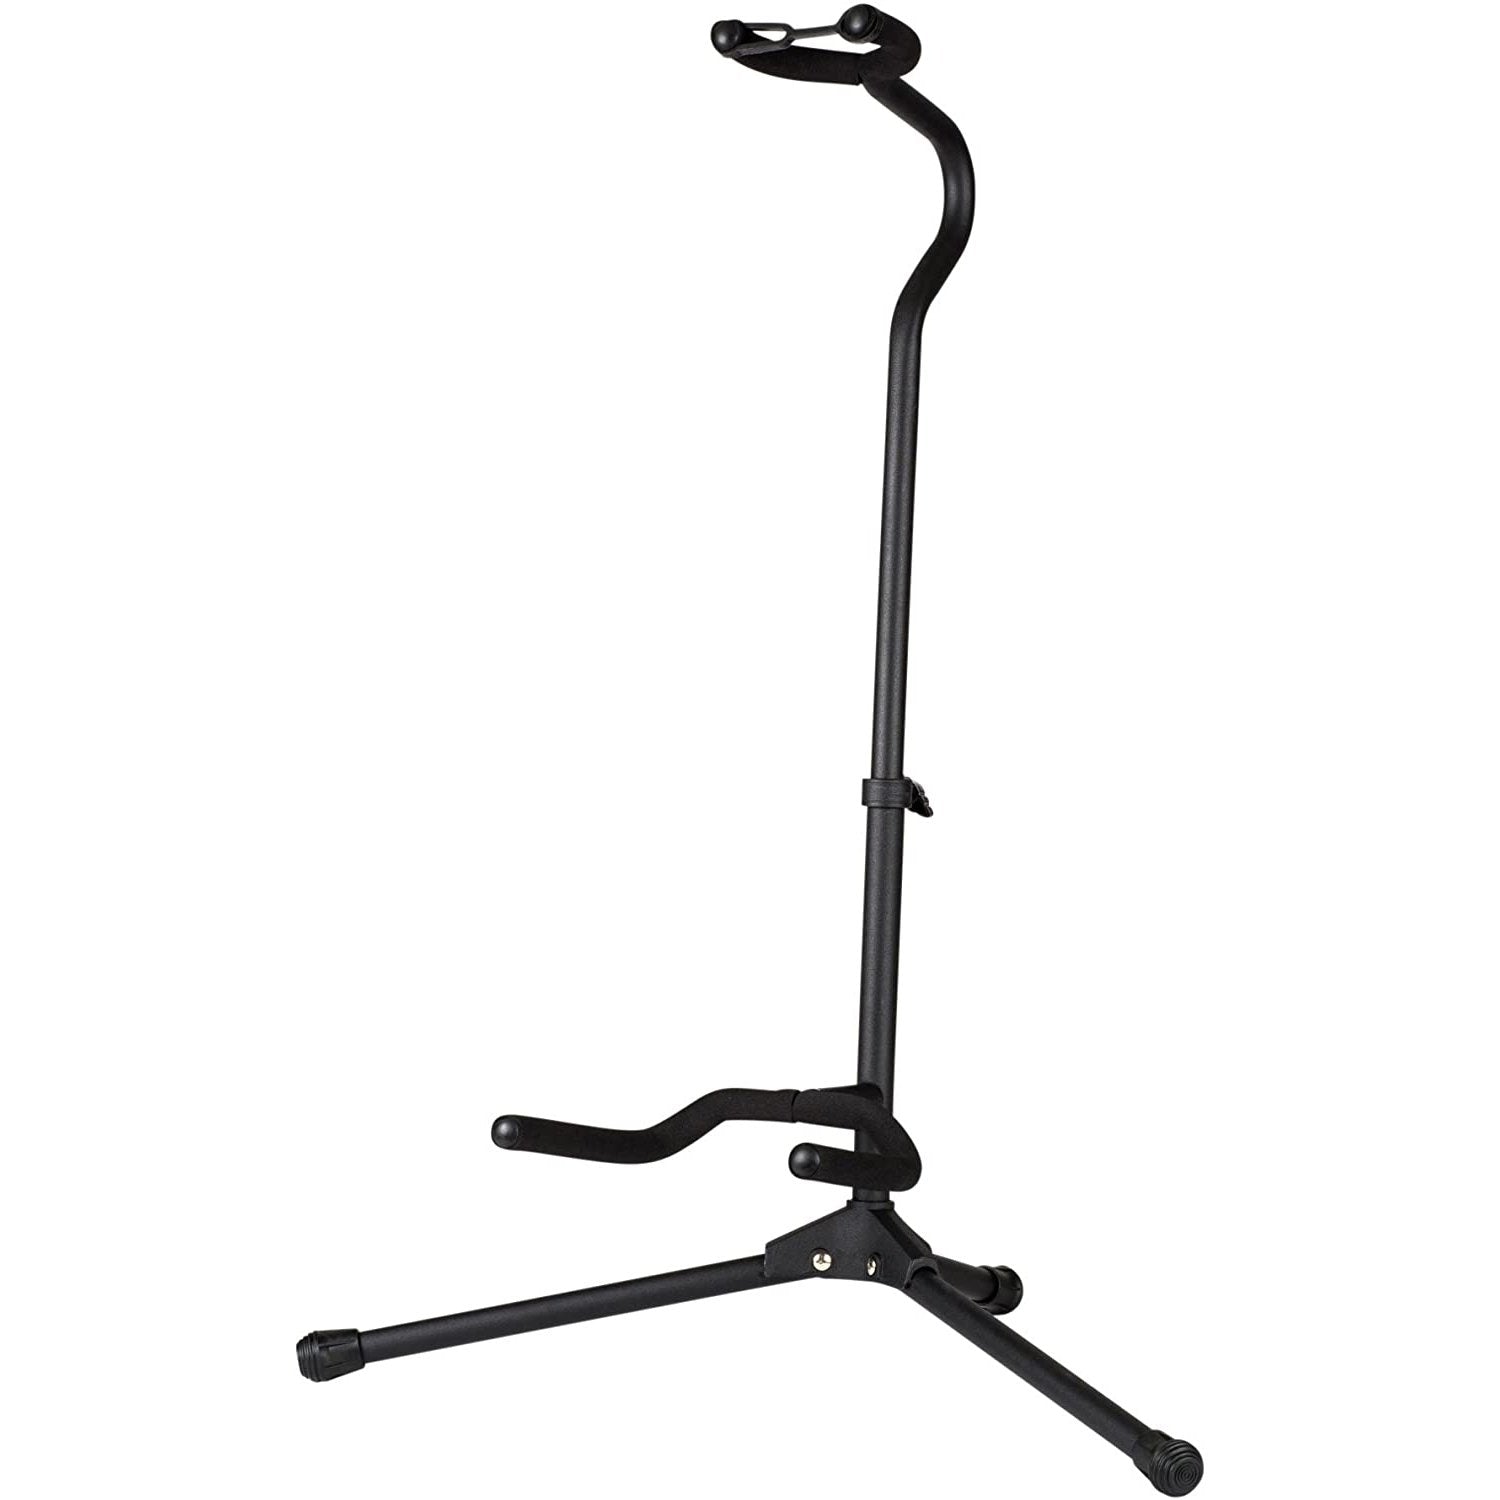 Peavey Deluxe Guitar Stand-Black-Music World Academy